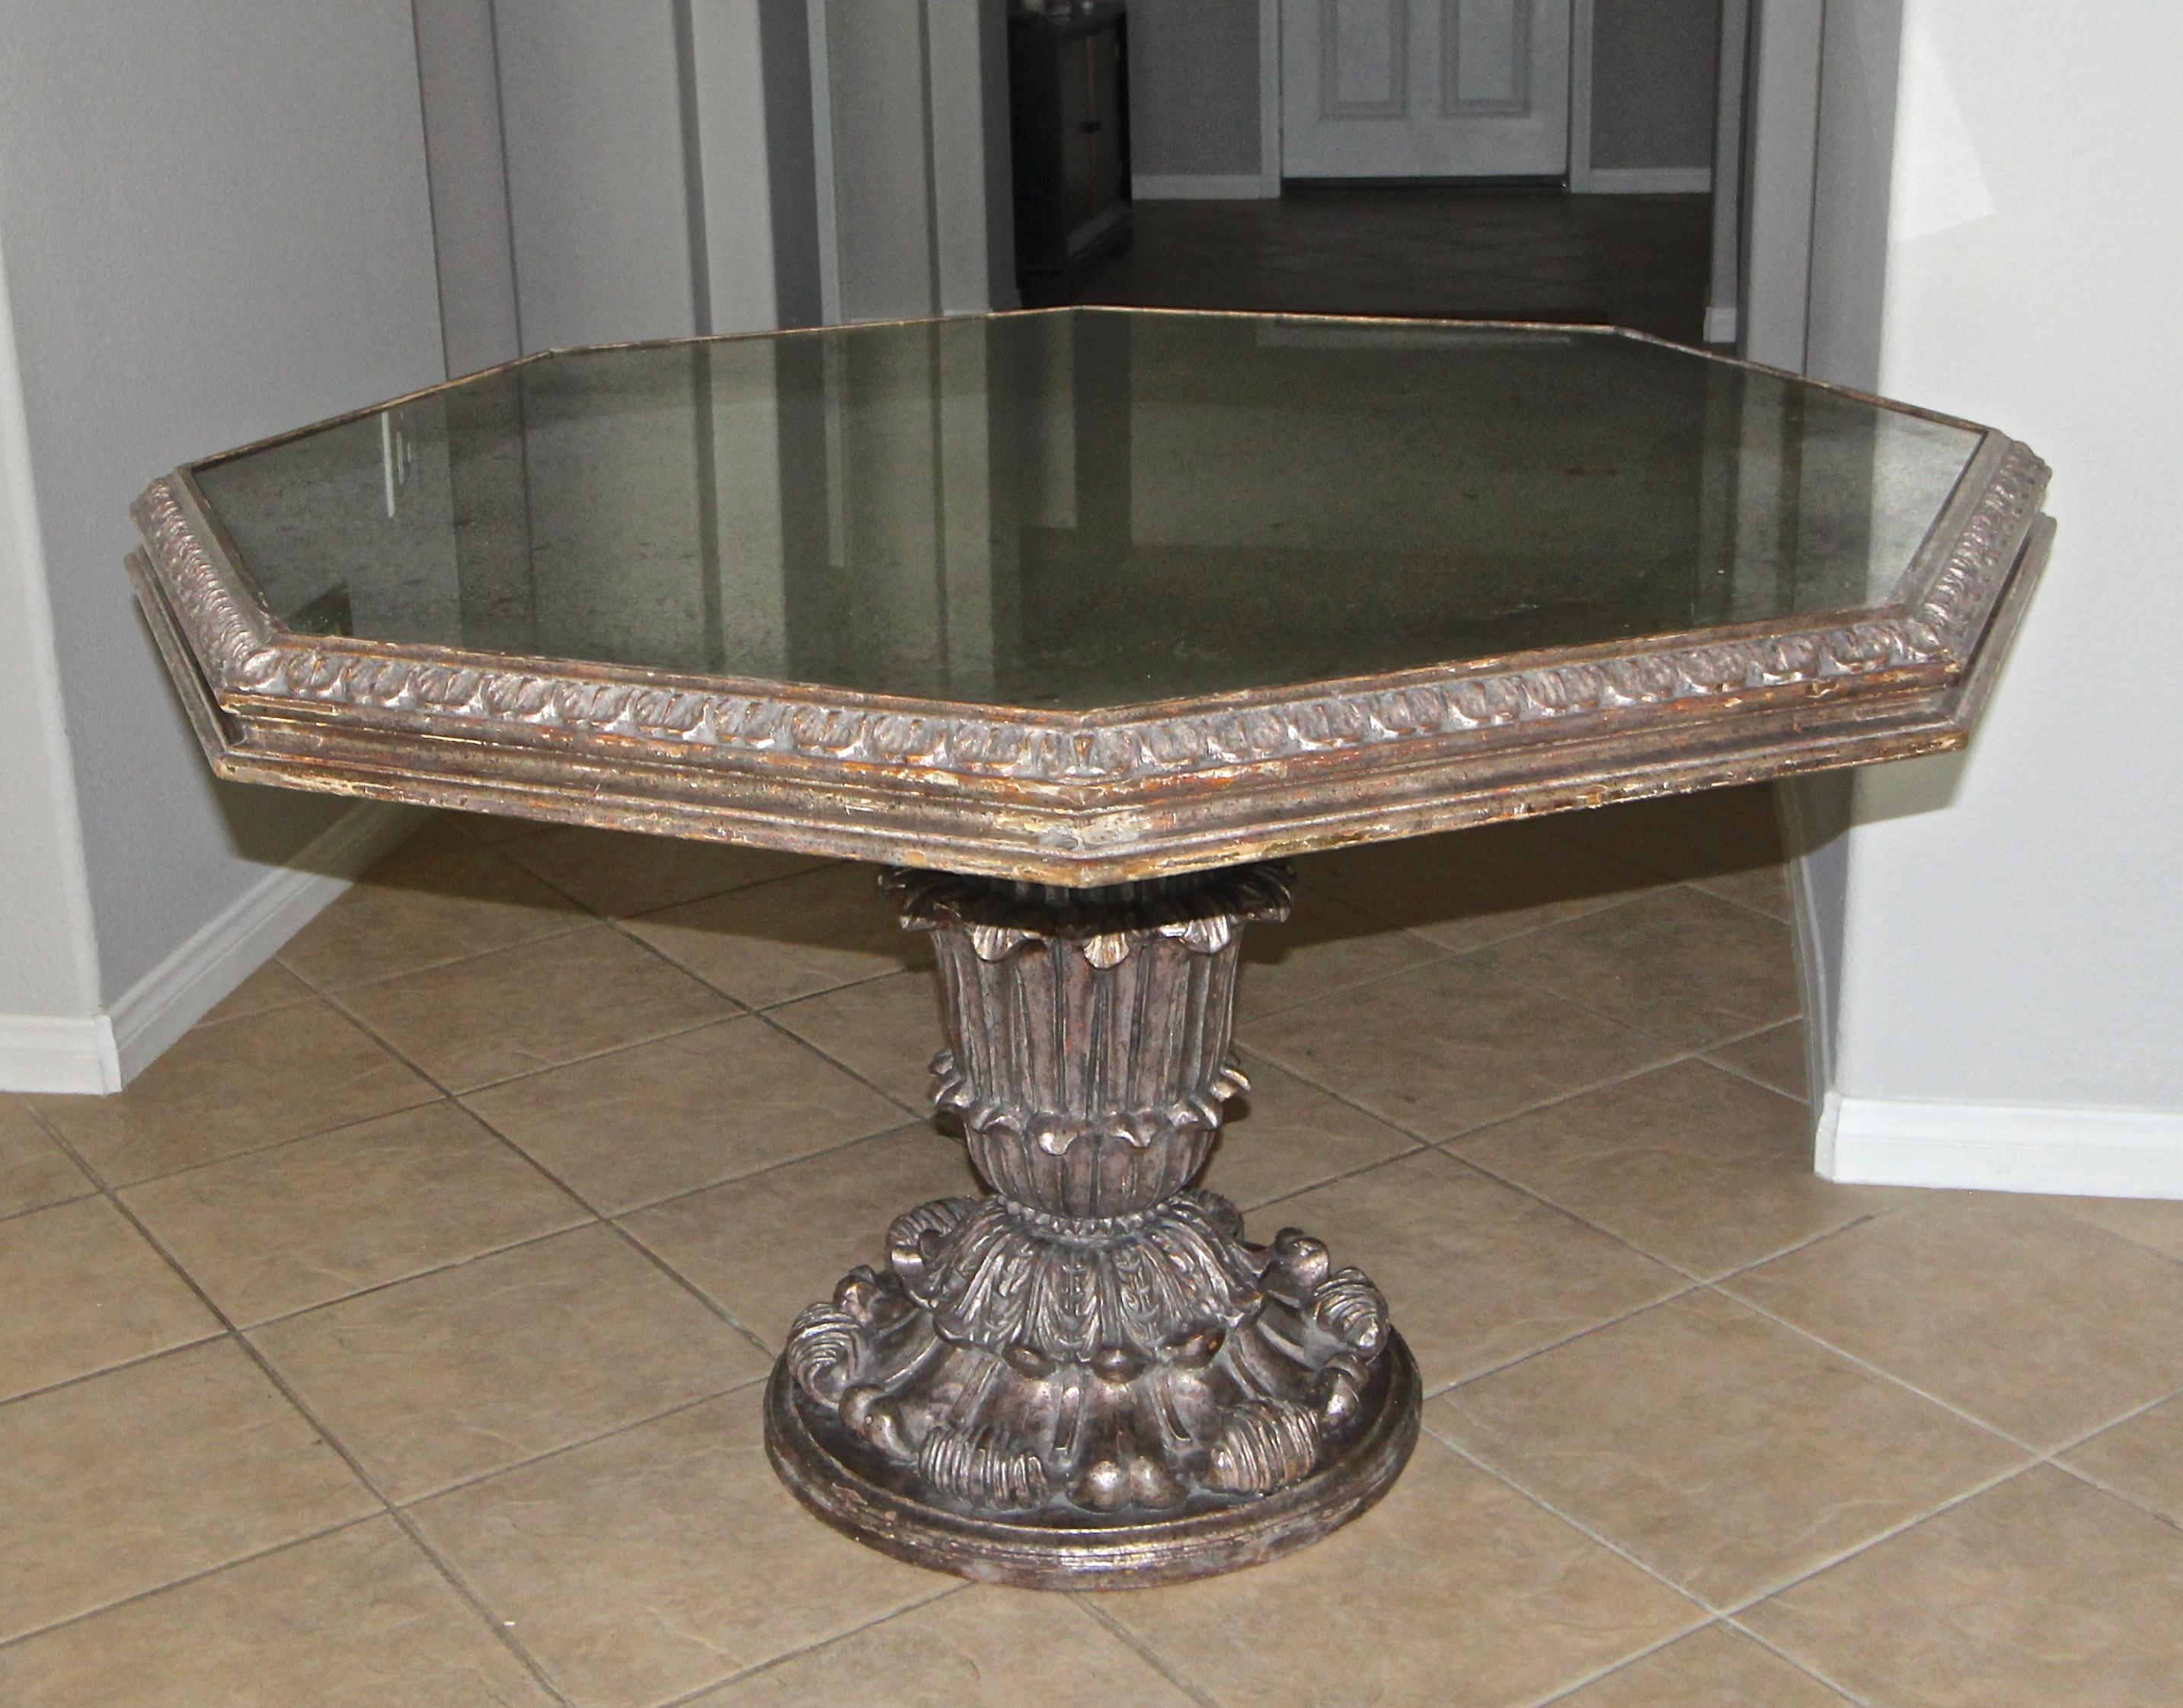 Beautiful French neoclassical style silver giltwood hexagon centre or center table with inset antique mirror glass top. The table is expertly made through out including a finely carved scrolled acanthus leaves base. The aged antiqued silver gesso